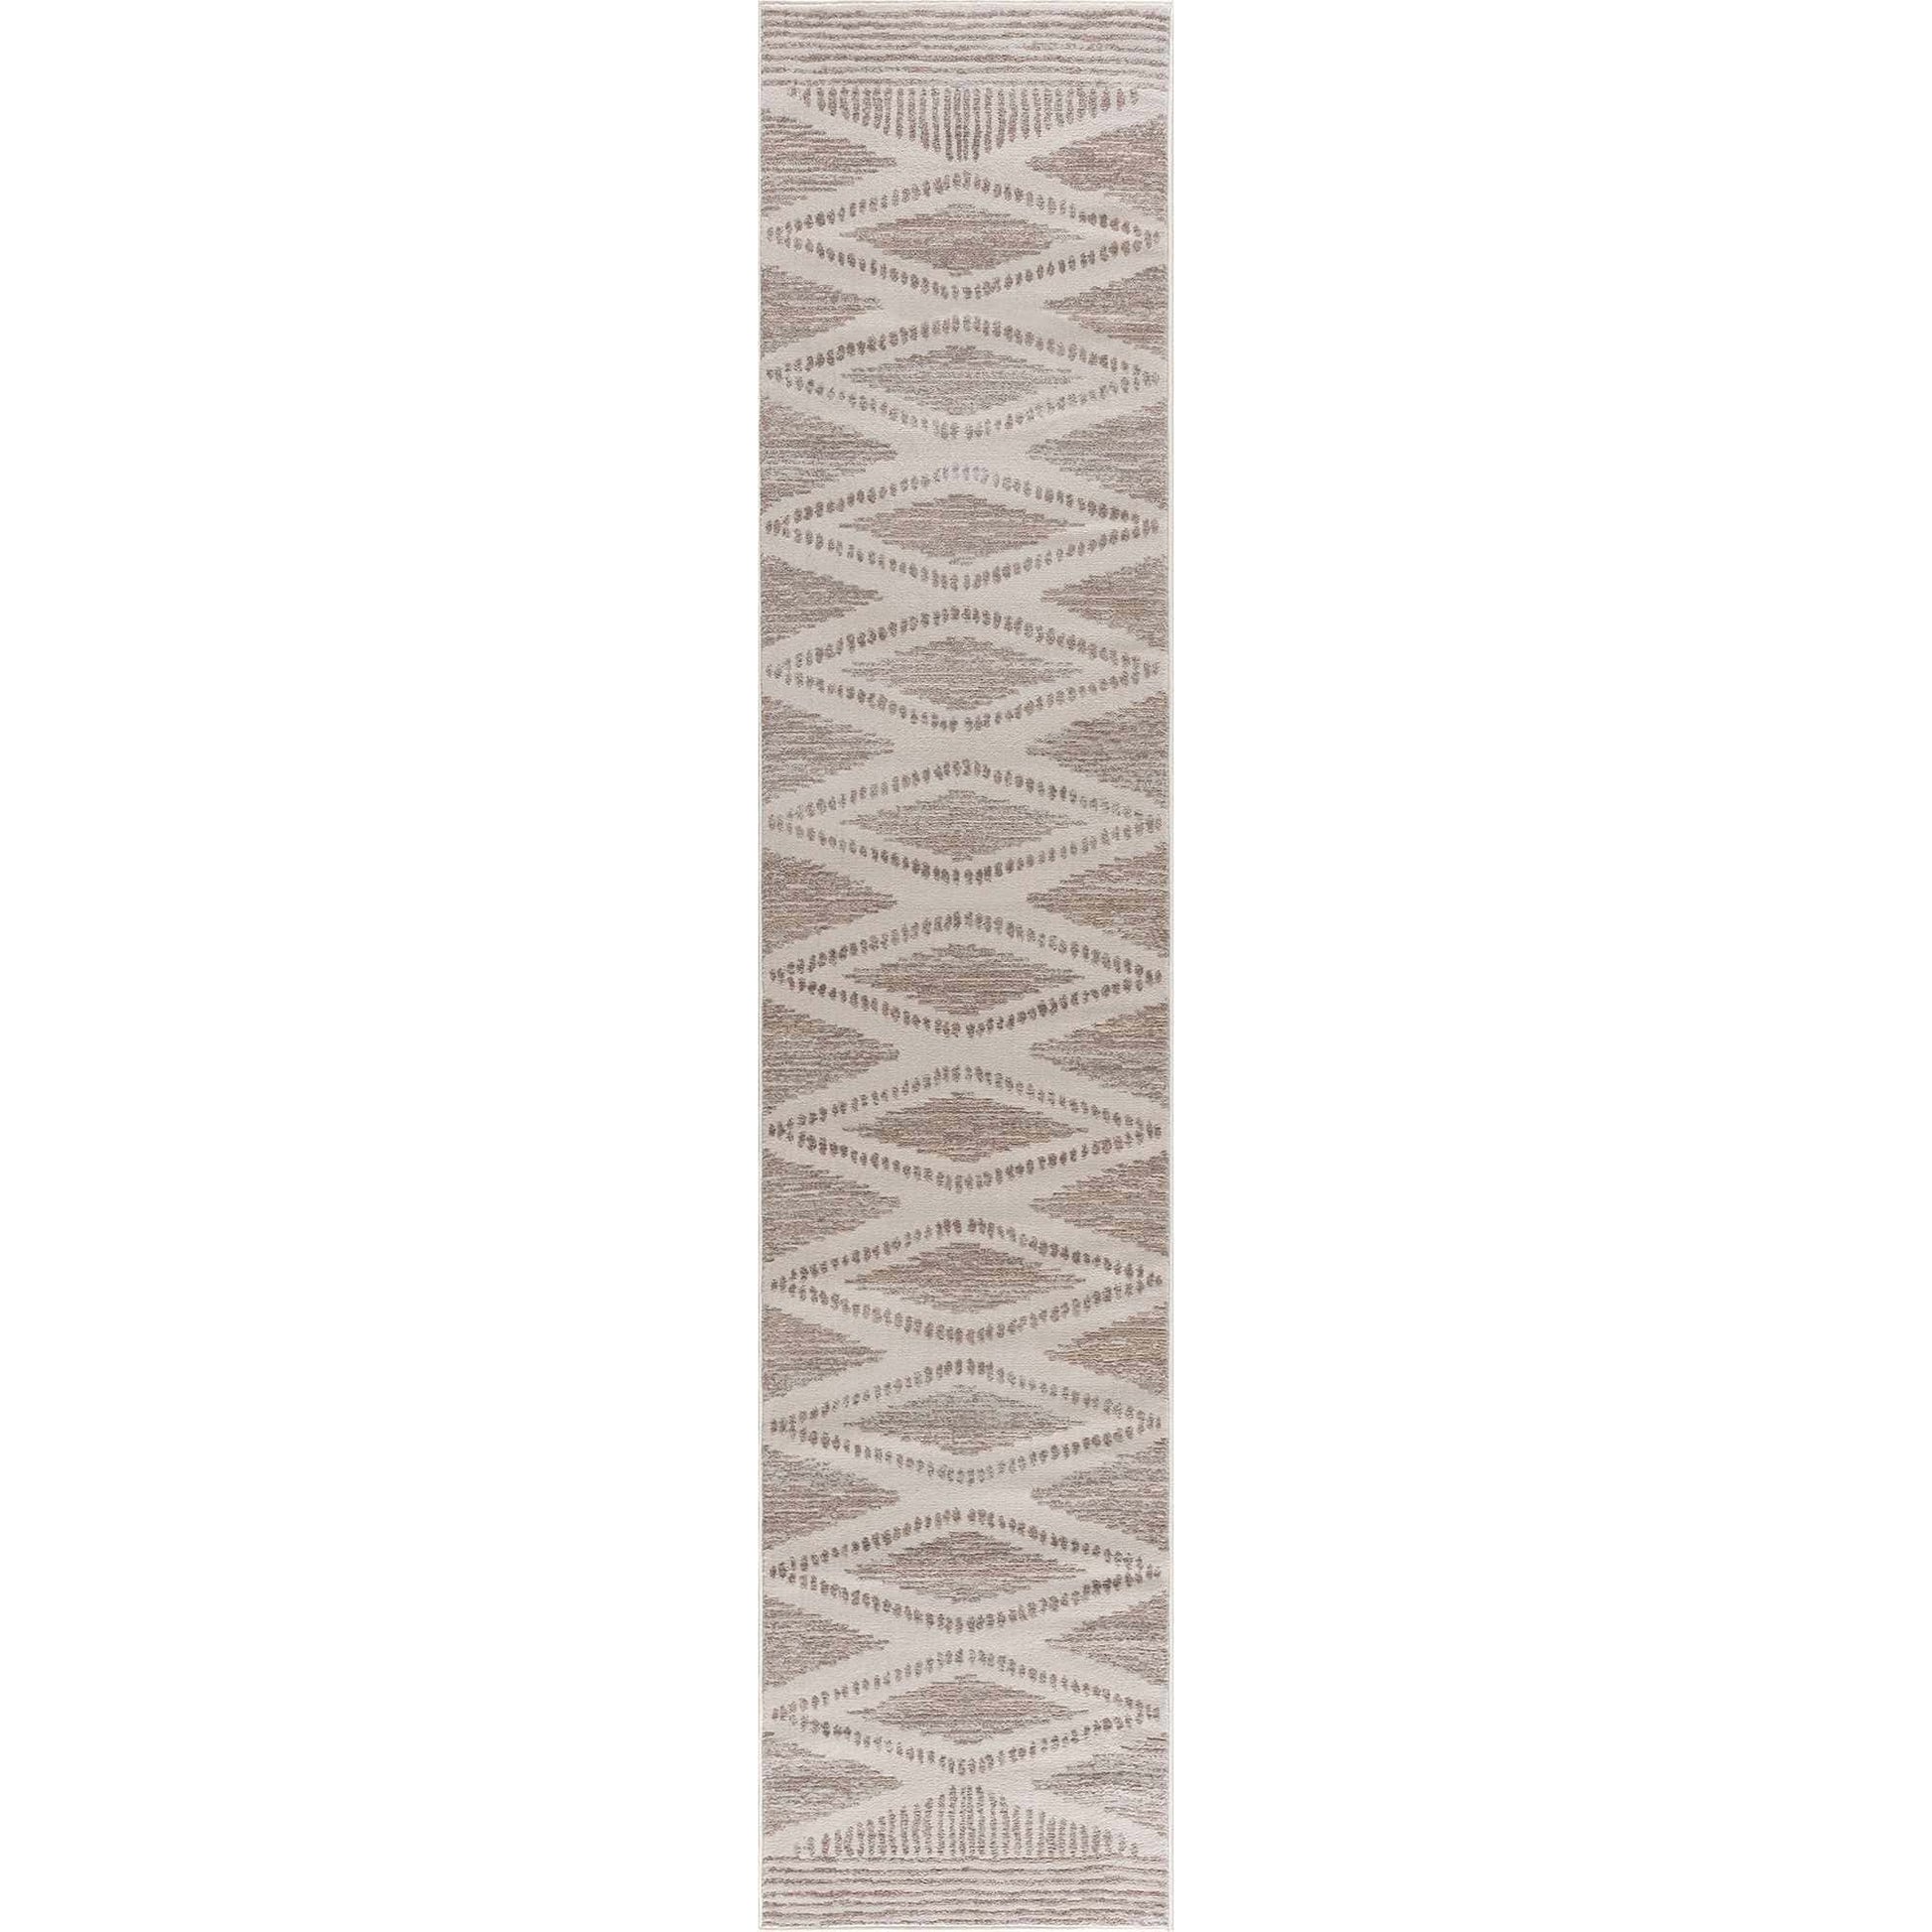 Boutique Rugs Rugs 2'7" x 10' Runner Tigrisis Beige 2328 Area Rug